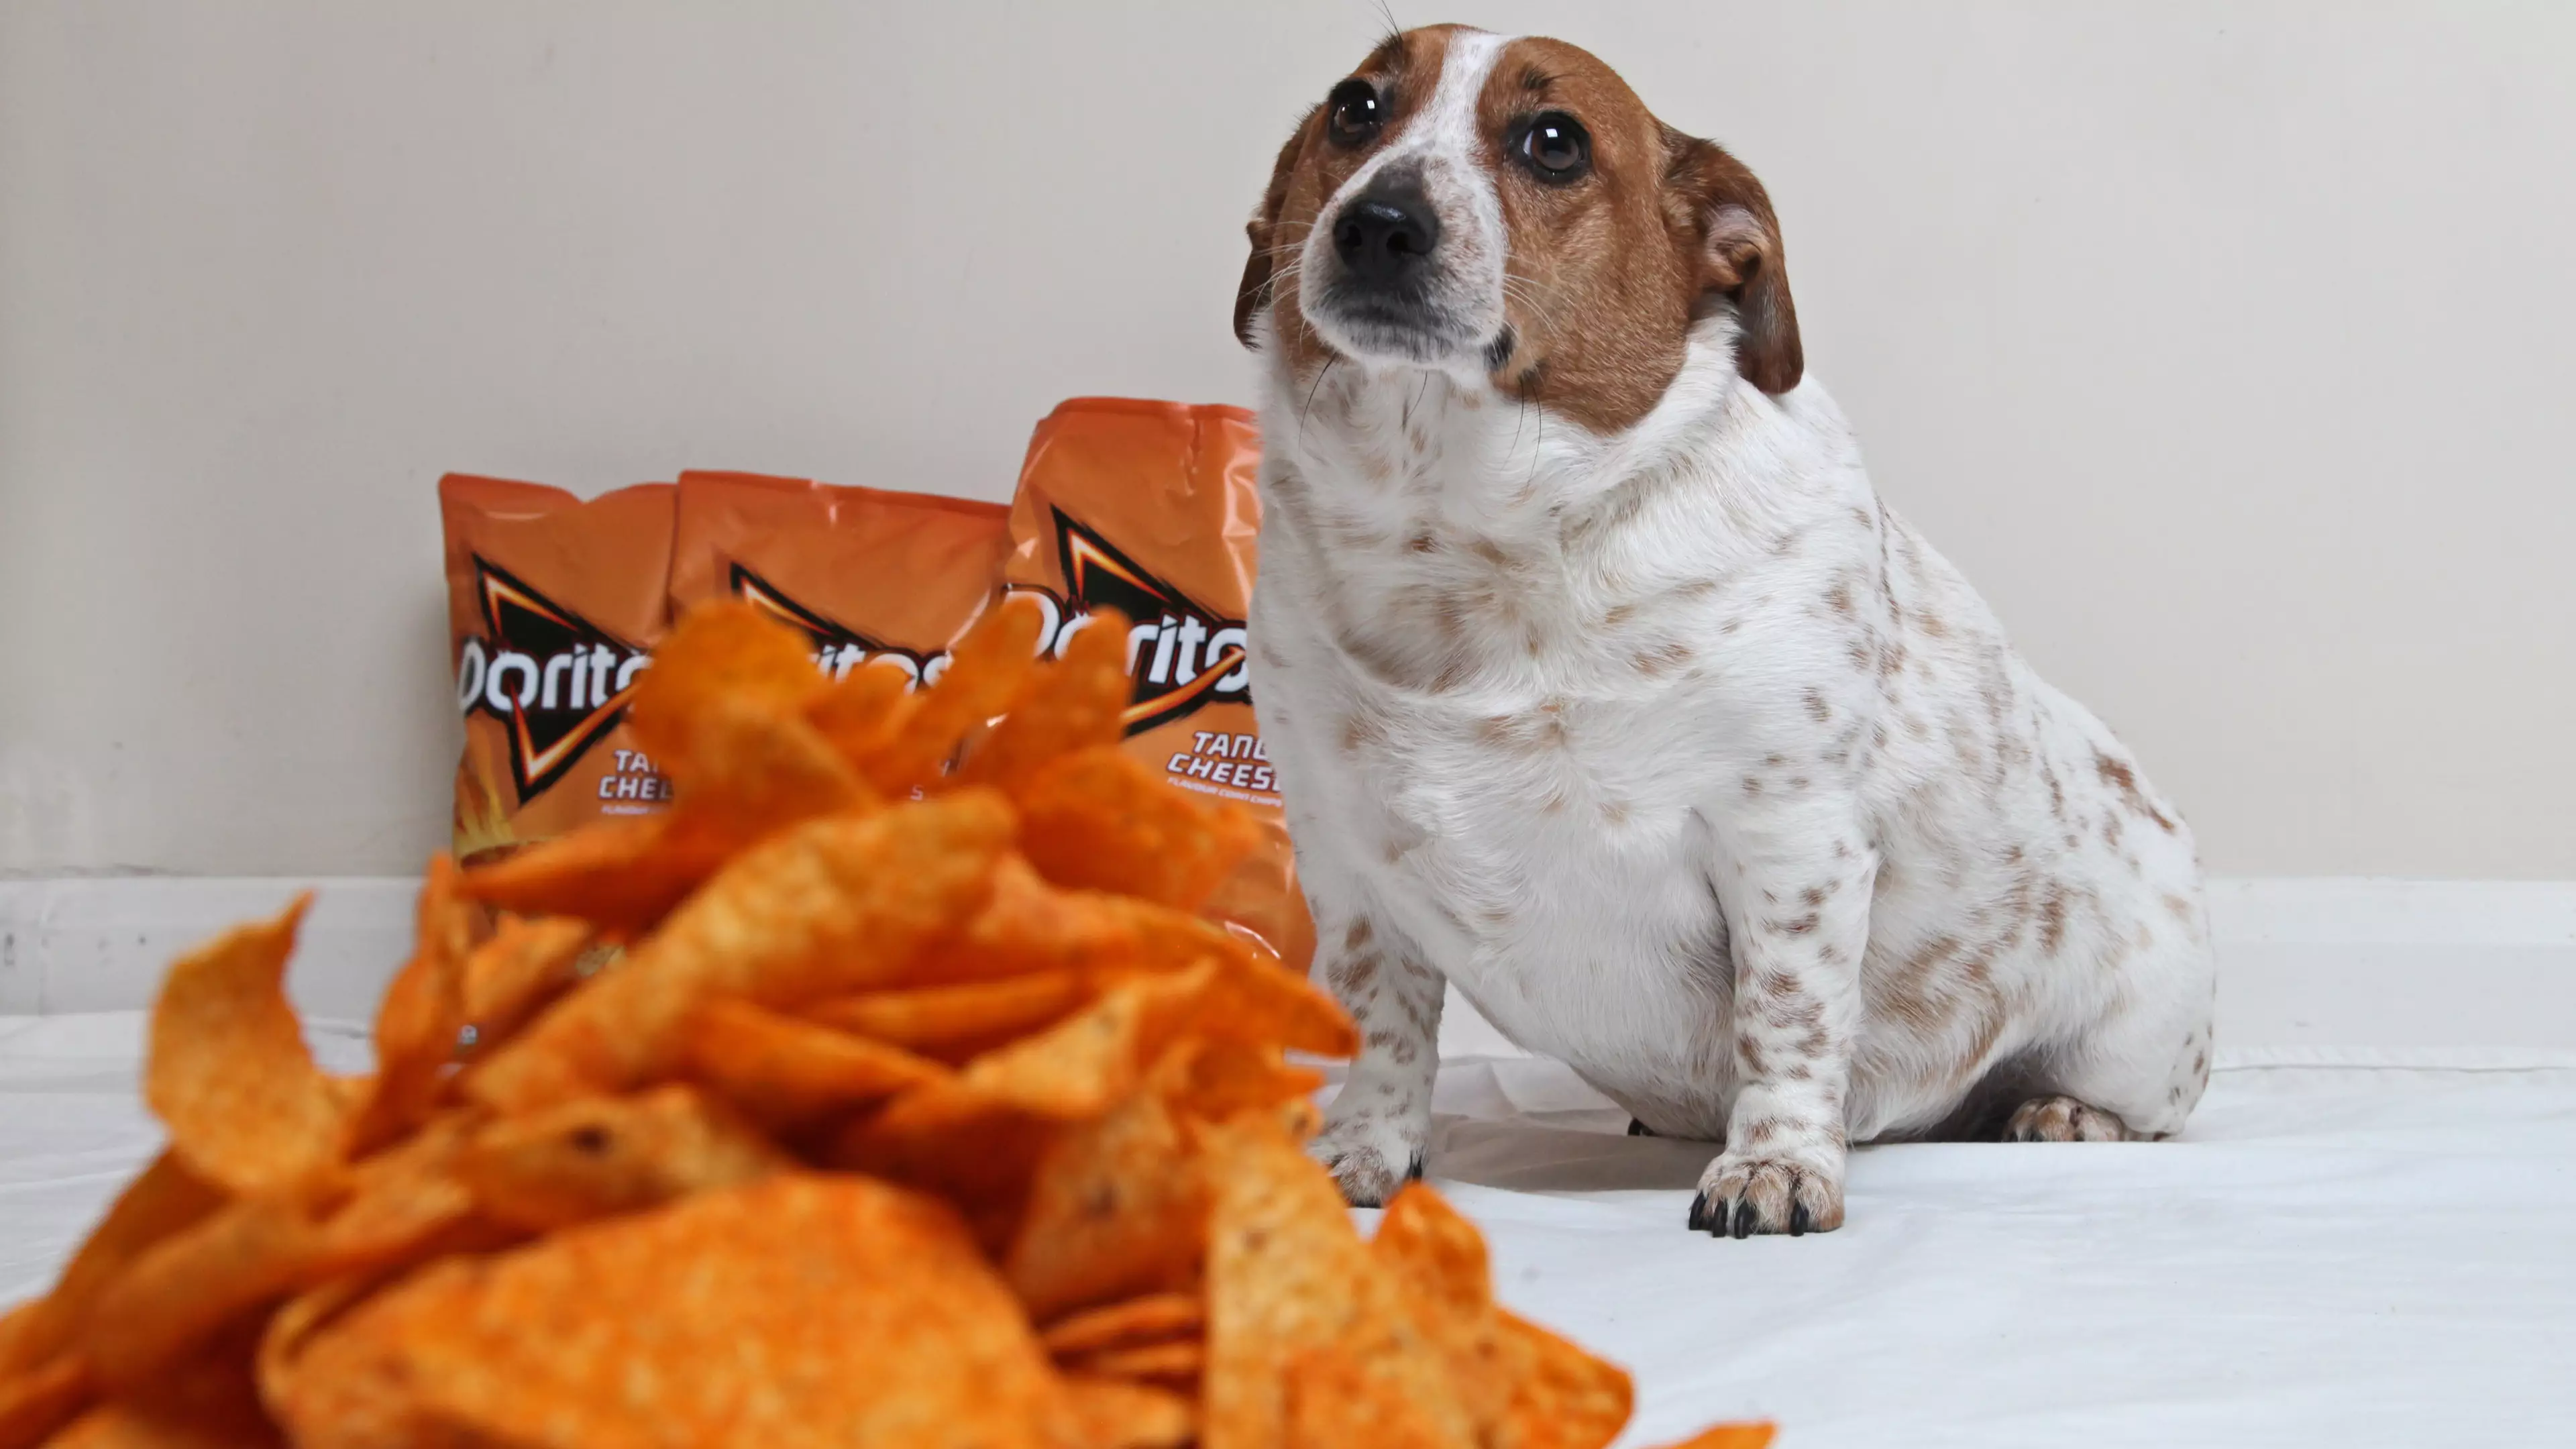 Dog Ballooned To Almost Double Normal Weight After Gorging On Cheesy Doritos 